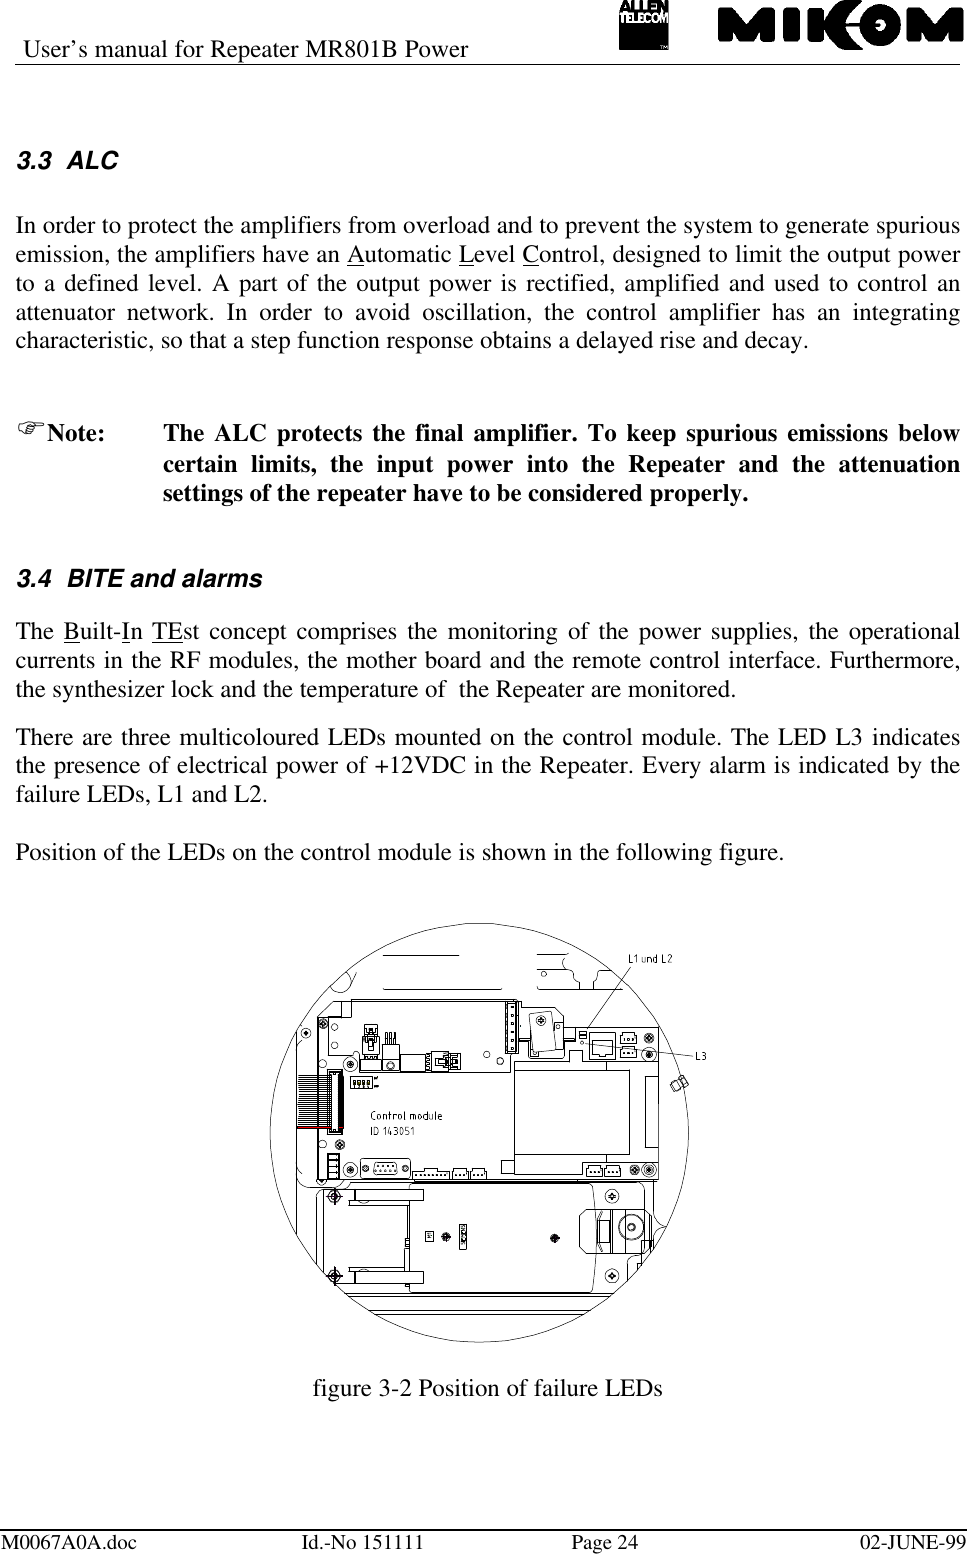 User’s manual for Repeater MR801B PowerM0067A0A.doc Id.-No 151111 Page 24 02-JUNE-993.3 ALCIn order to protect the amplifiers from overload and to prevent the system to generate spuriousemission, the amplifiers have an Automatic Level Control, designed to limit the output powerto a defined level. A part of the output power is rectified, amplified and used to control anattenuator network. In order to avoid oscillation, the control amplifier has an integratingcharacteristic, so that a step function response obtains a delayed rise and decay.FNote: The ALC protects the final amplifier. To keep spurious emissions belowcertain limits, the input power into the Repeater and the attenuationsettings of the repeater have to be considered properly.3.4 BITE and alarmsThe Built-In TEst concept comprises the monitoring of the power supplies, the operationalcurrents in the RF modules, the mother board and the remote control interface. Furthermore,the synthesizer lock and the temperature of  the Repeater are monitored.There are three multicoloured LEDs mounted on the control module. The LED L3 indicatesthe presence of electrical power of +12VDC in the Repeater. Every alarm is indicated by thefailure LEDs, L1 and L2.Position of the LEDs on the control module is shown in the following figure.figure 3-2 Position of failure LEDs